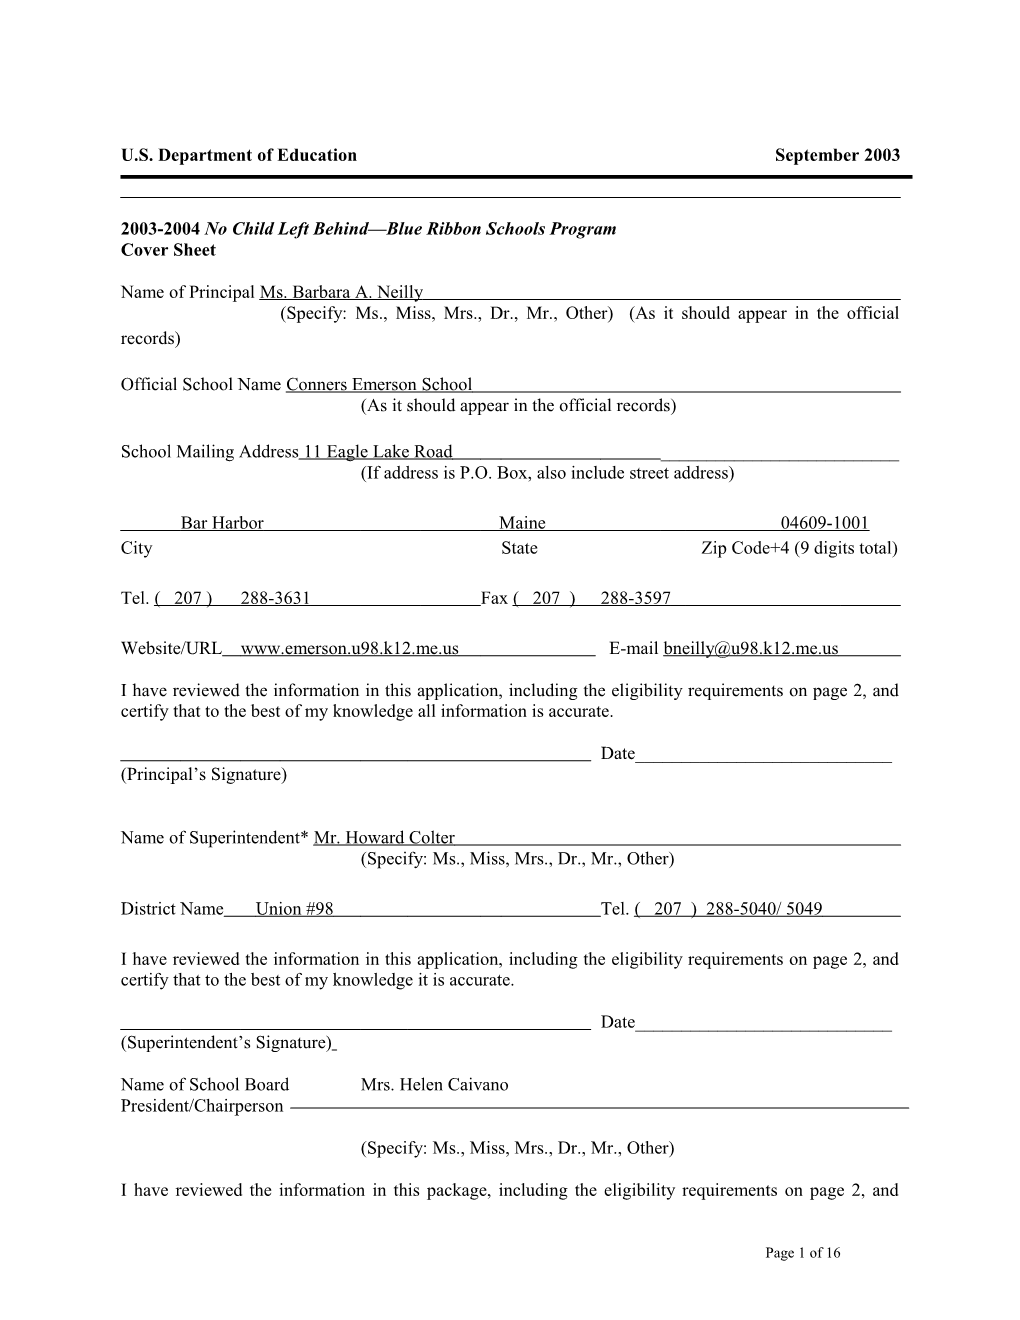 Conners Emerson School 2004 No Child Left Behind-Blue Ribbon School Application (Msword)